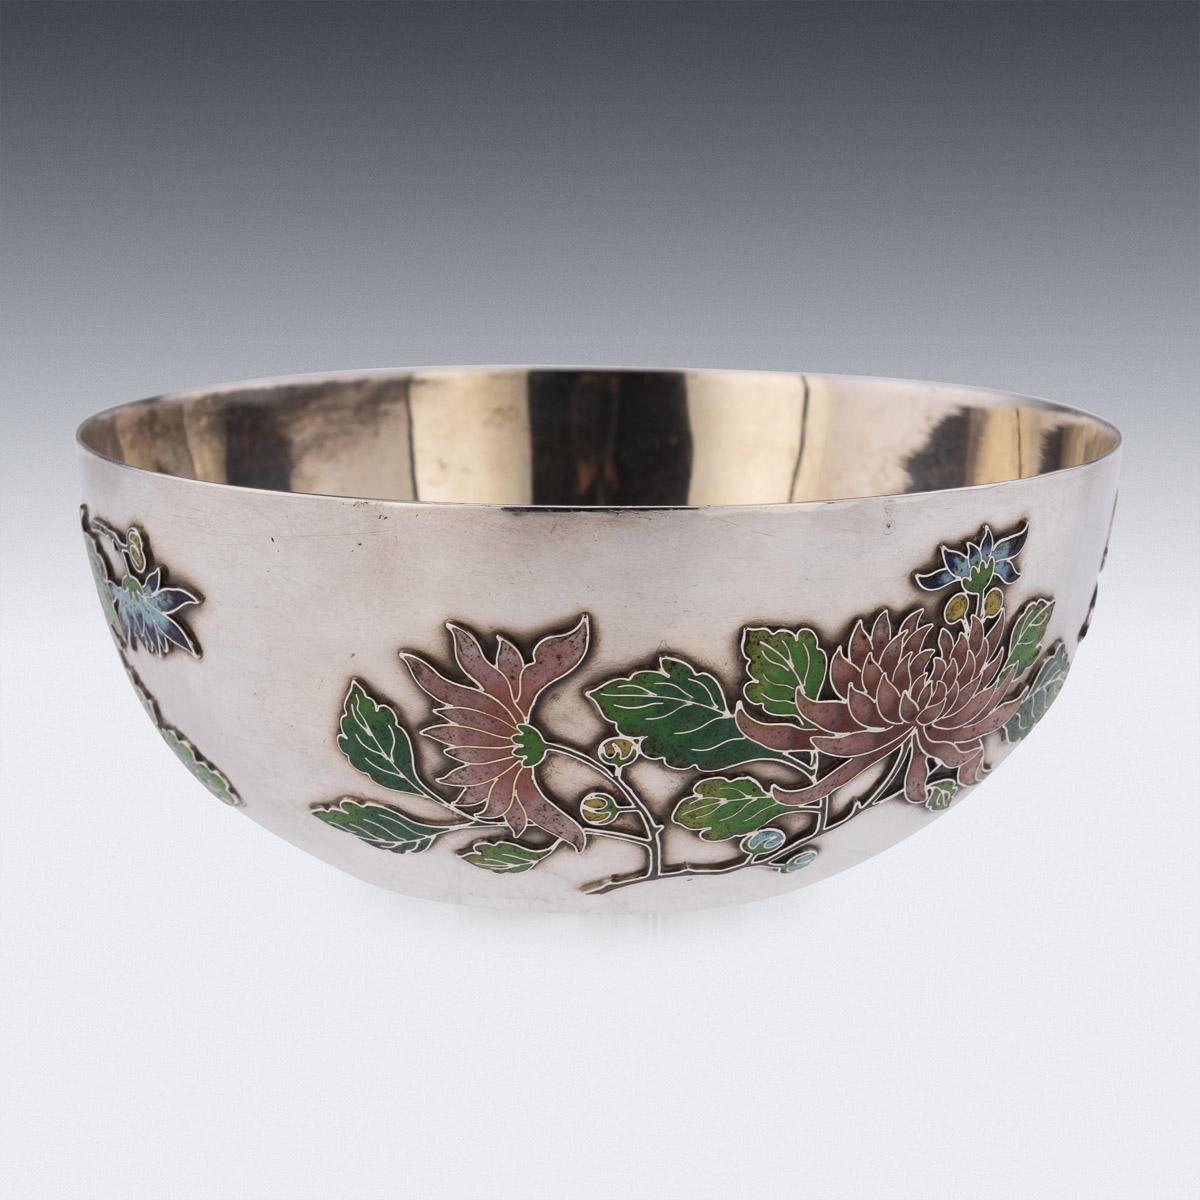 19th Century Extremely Rare Chinese export silver & enamel finger bowl, the sides are applied with shaded enamels, depicting blooming chrysanthemums flowers on polished ground. The bowl is of good traditional size and features stunning workmanship.